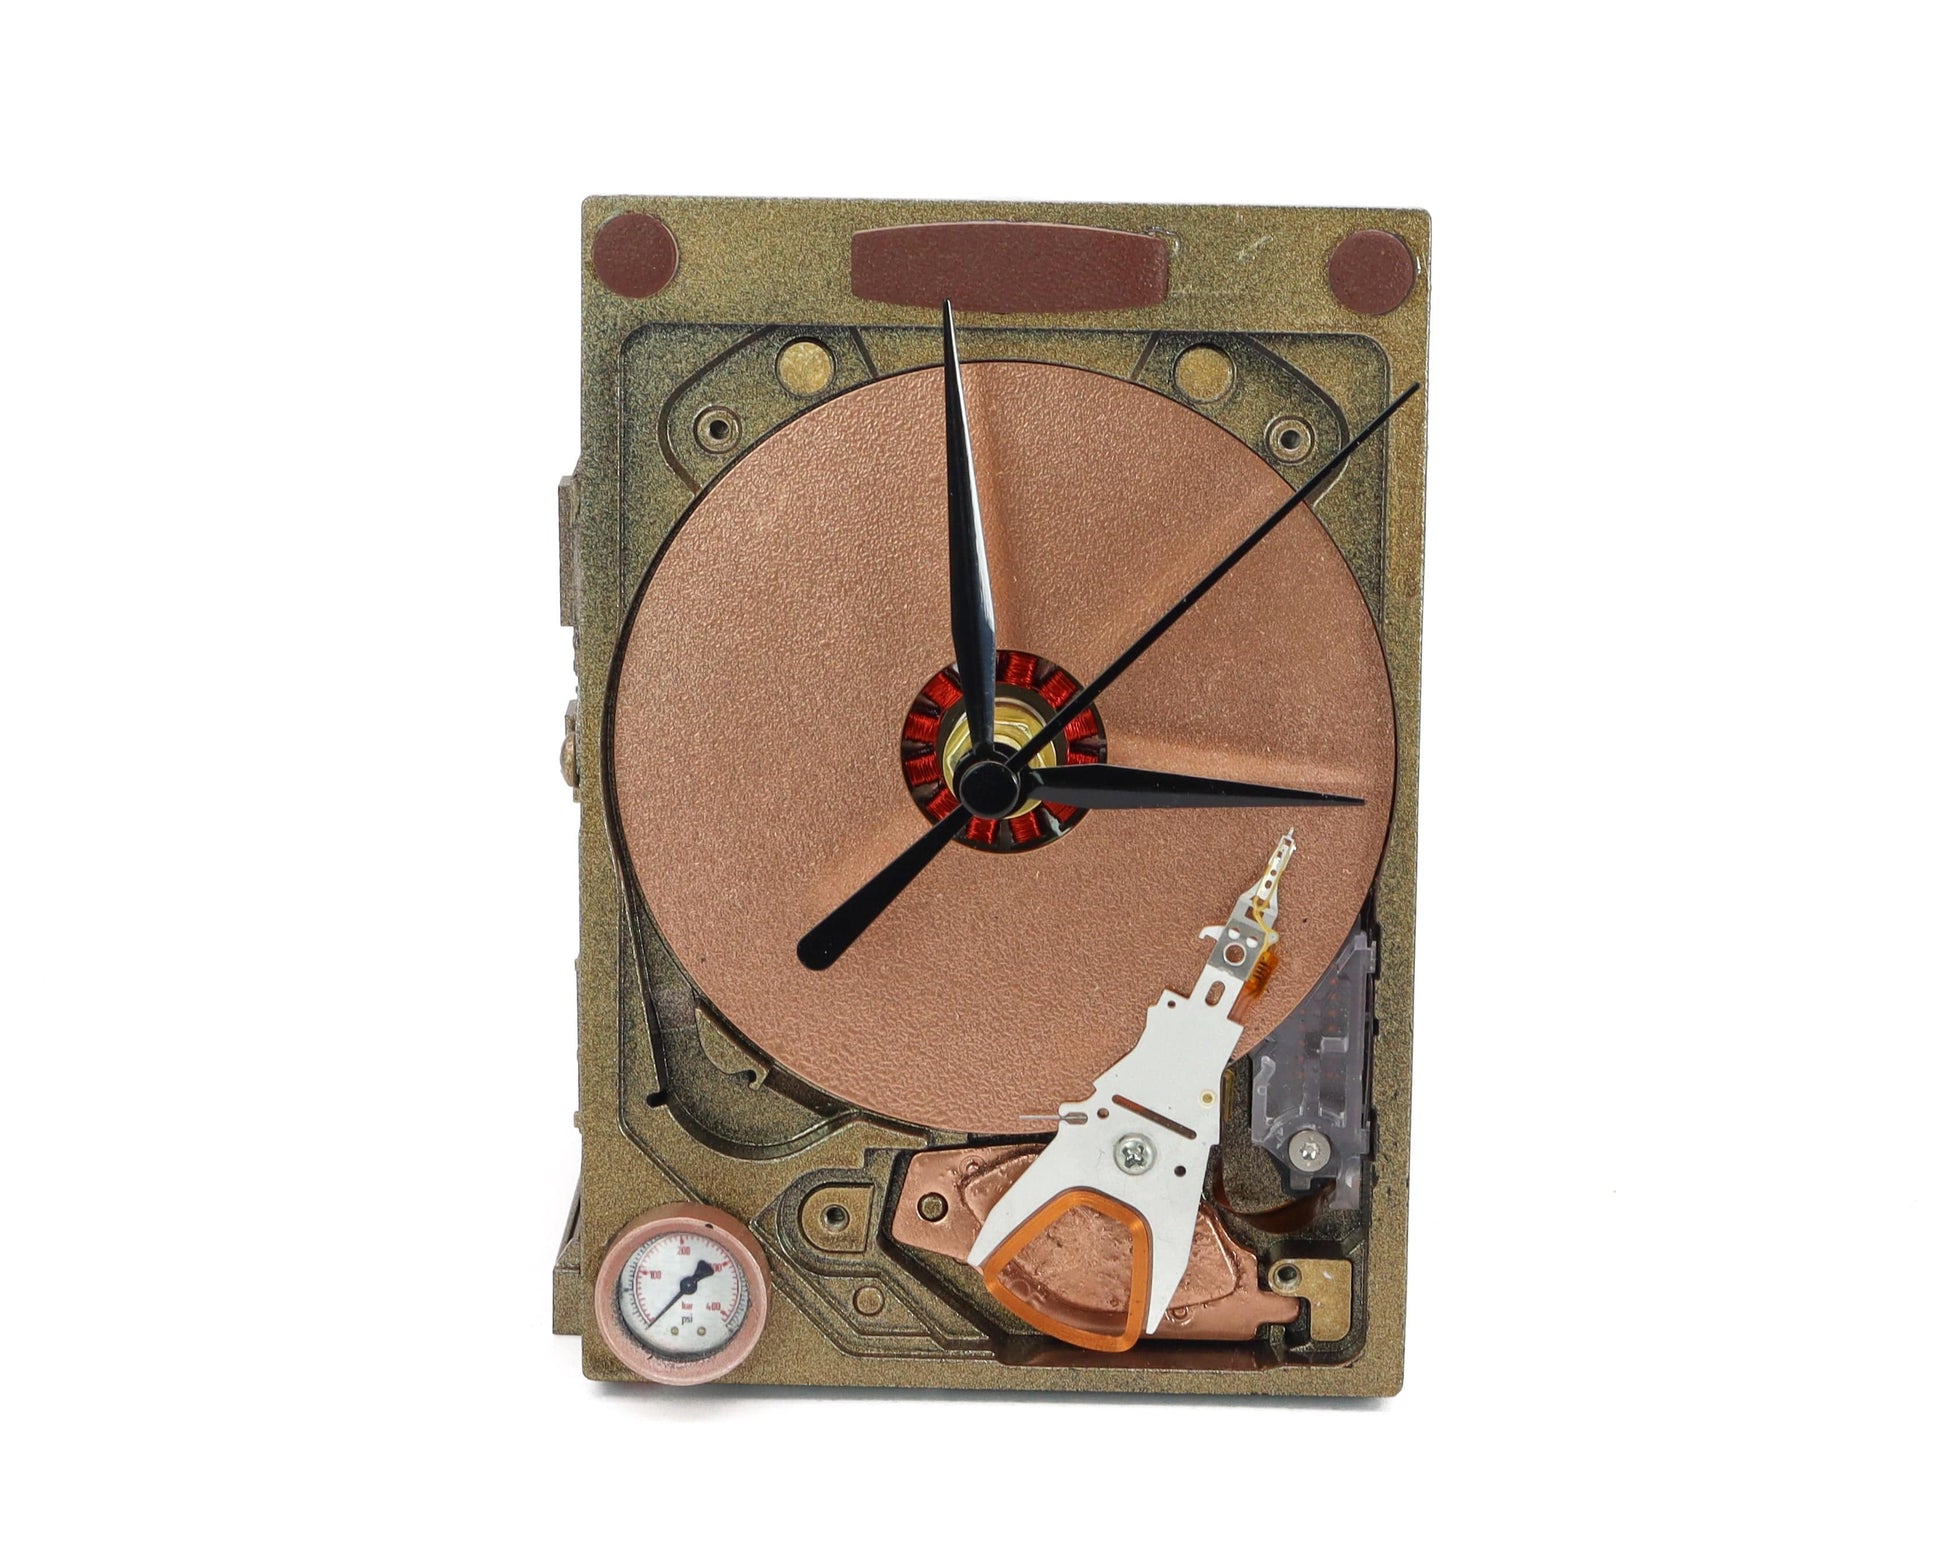 Upcycled Steampunk Lost in Time Antikythera Hard Drive Clock